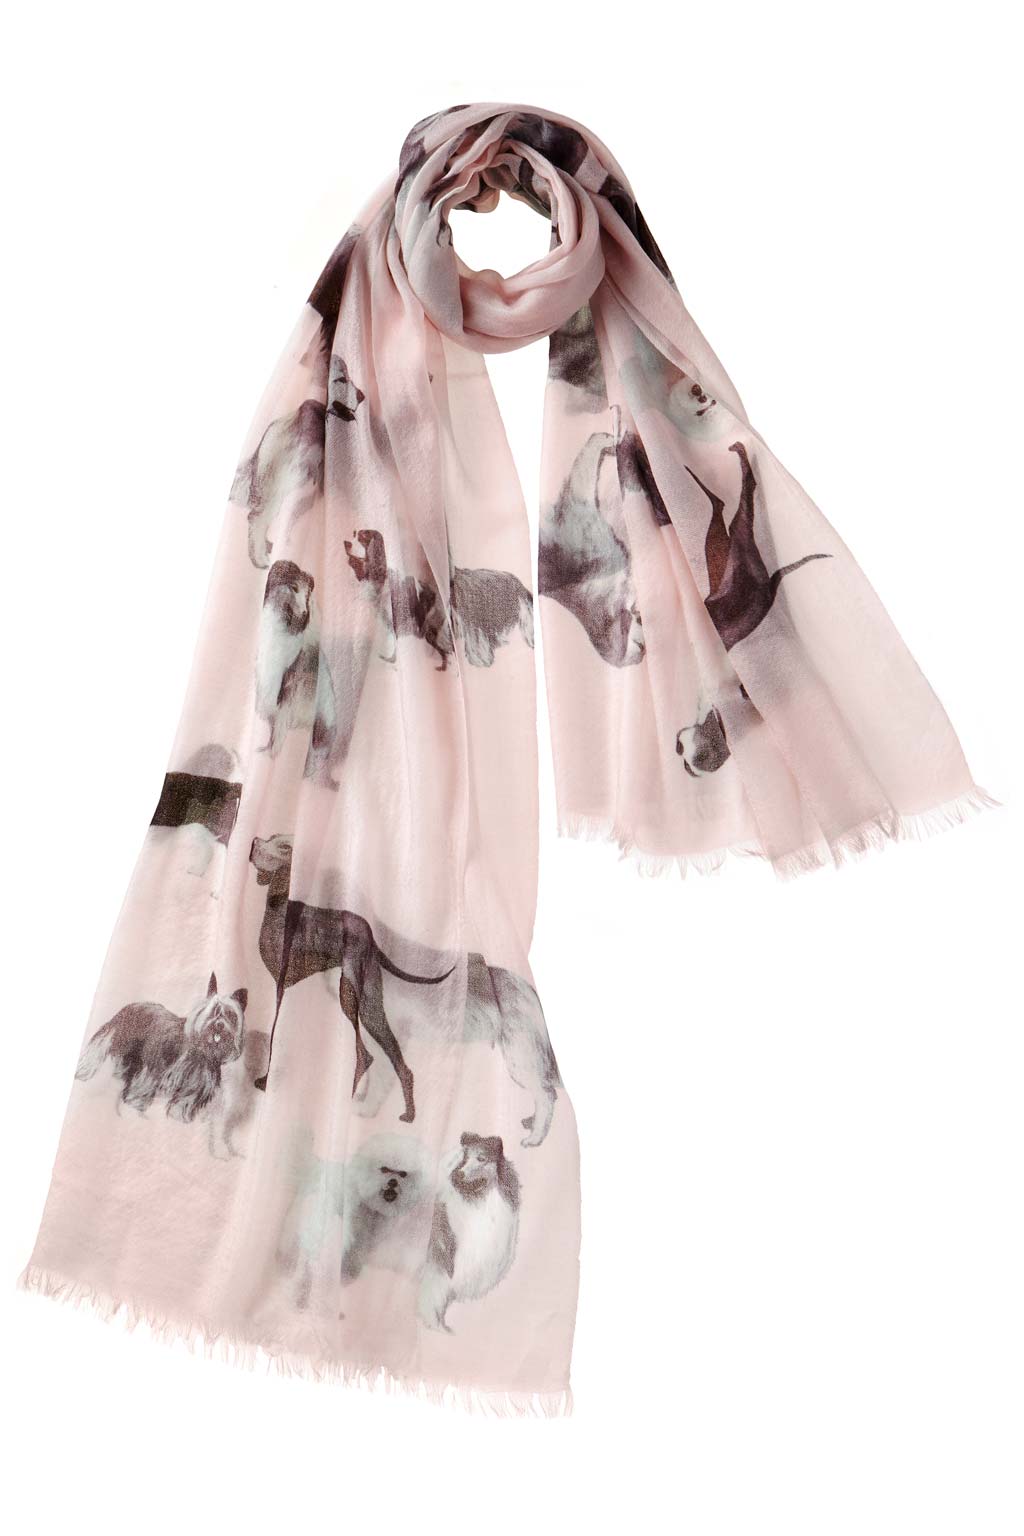 Alpine Cashmere's Dog's Life Scarf, featuring an illustrated print of dogs, in blossom pink